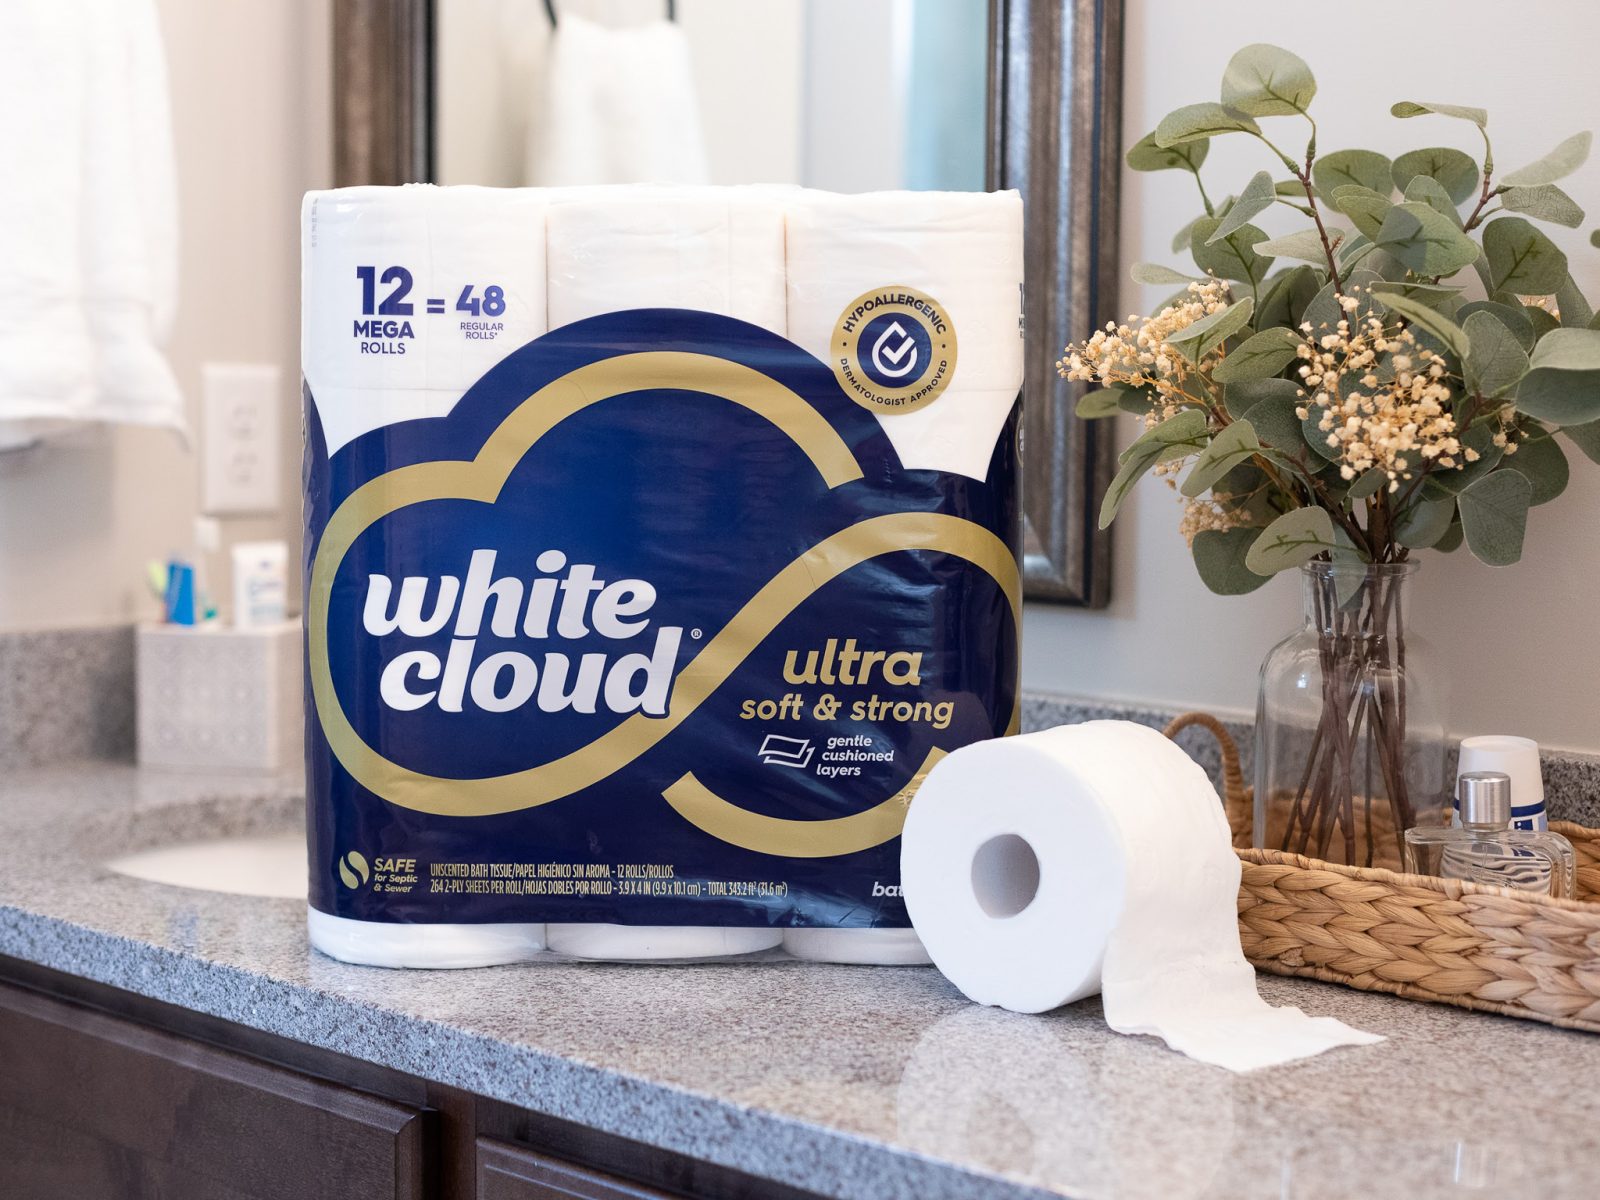 Discover White Cloud® Toilet Paper For Amazing Comfort And Strength – Save $4 At Publix